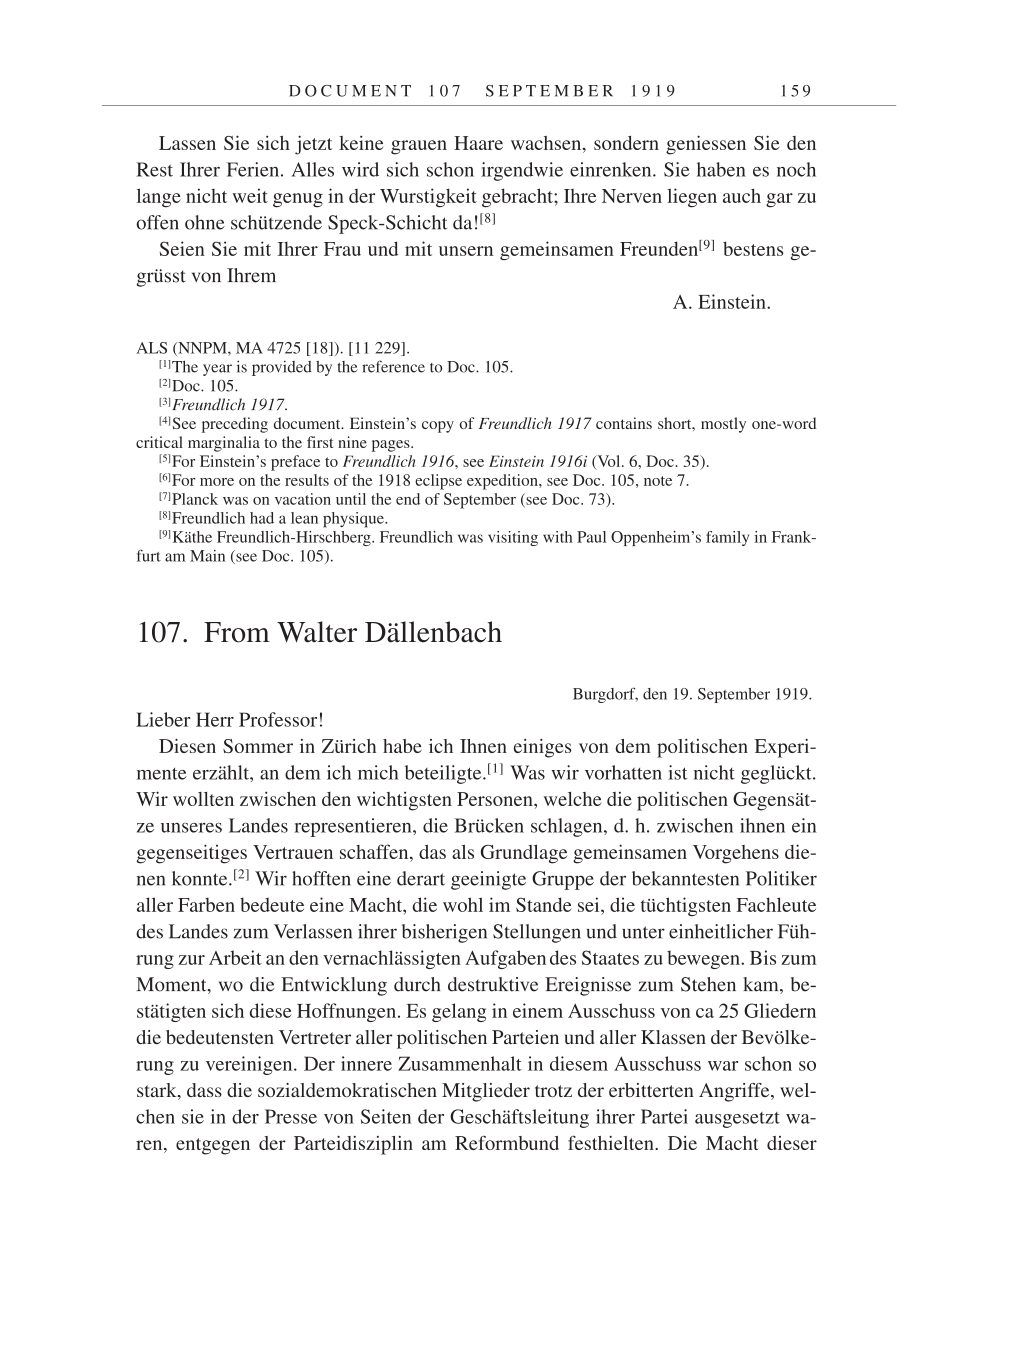 Volume 9: The Berlin Years: Correspondence January 1919-April 1920 page 159